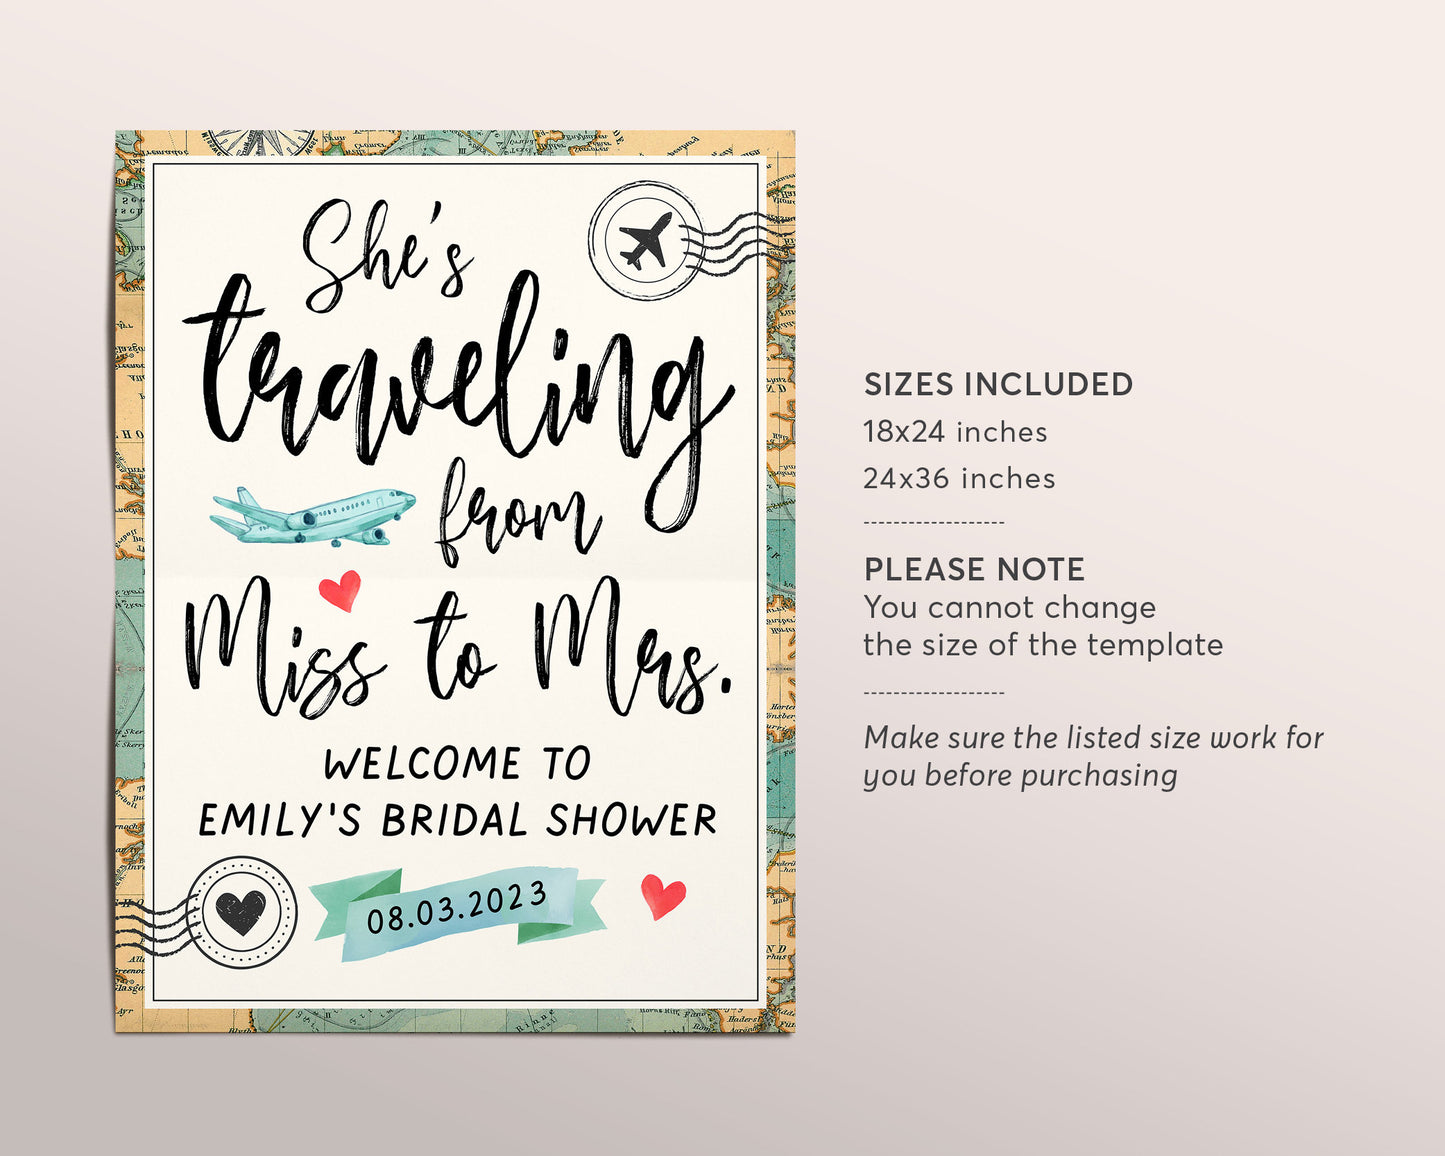 Bridal Shower She's Traveling from Miss to Mrs Printable Welcome Sign Editable Template, Vintage Travel Theme Destination Wedding Poster